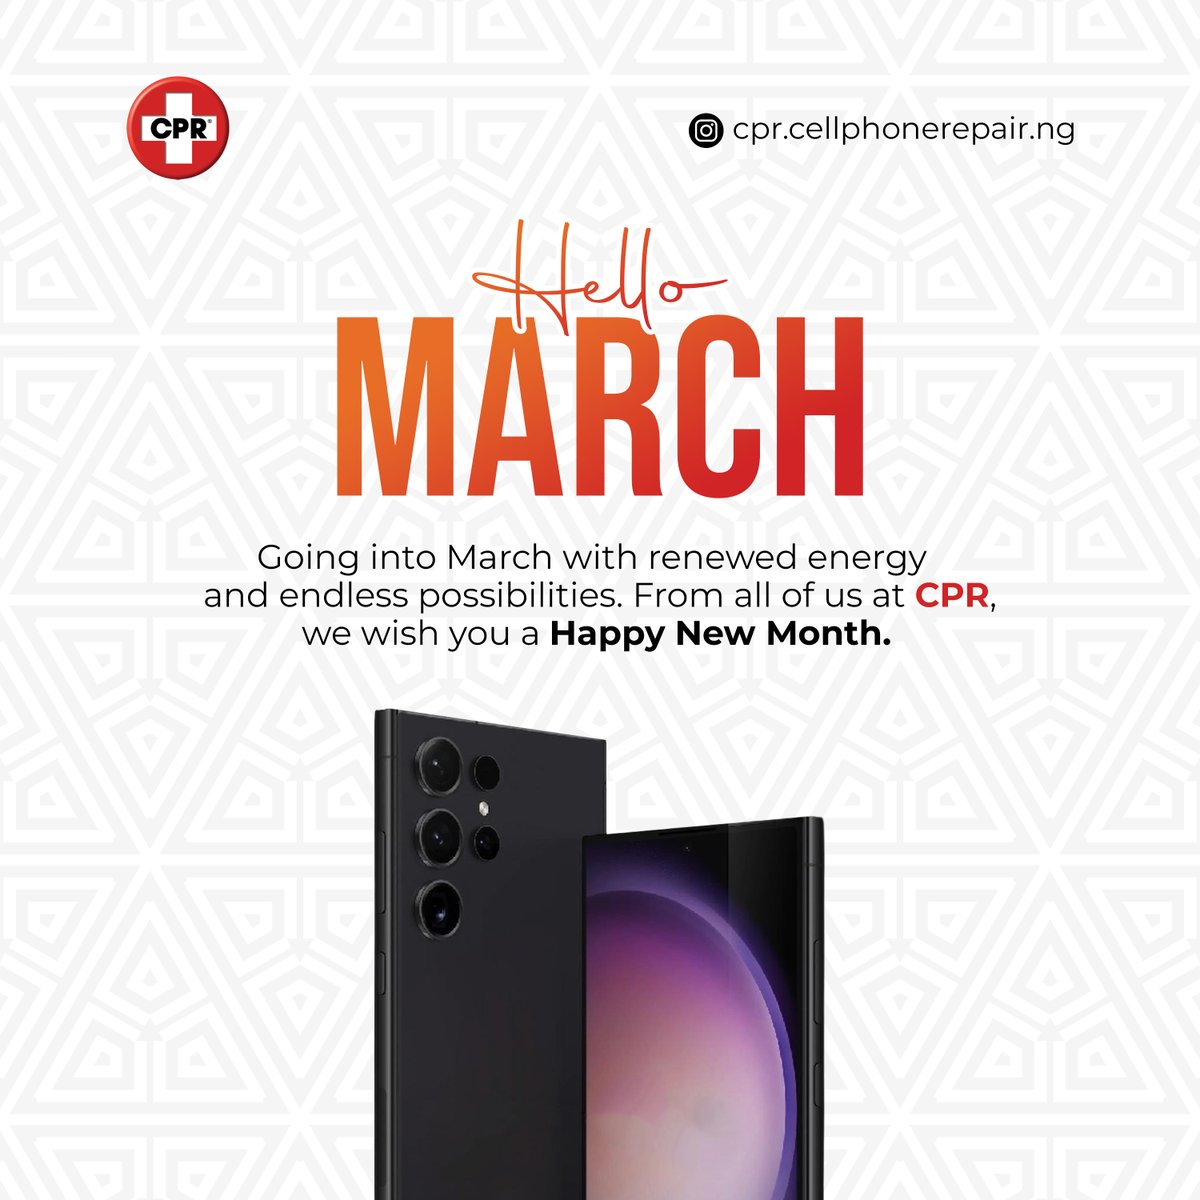 Welcome to March! We wish you a Happy New Month #newmonthvibes #HappyNewMonth #CPR #NewMonth #fridaymorning